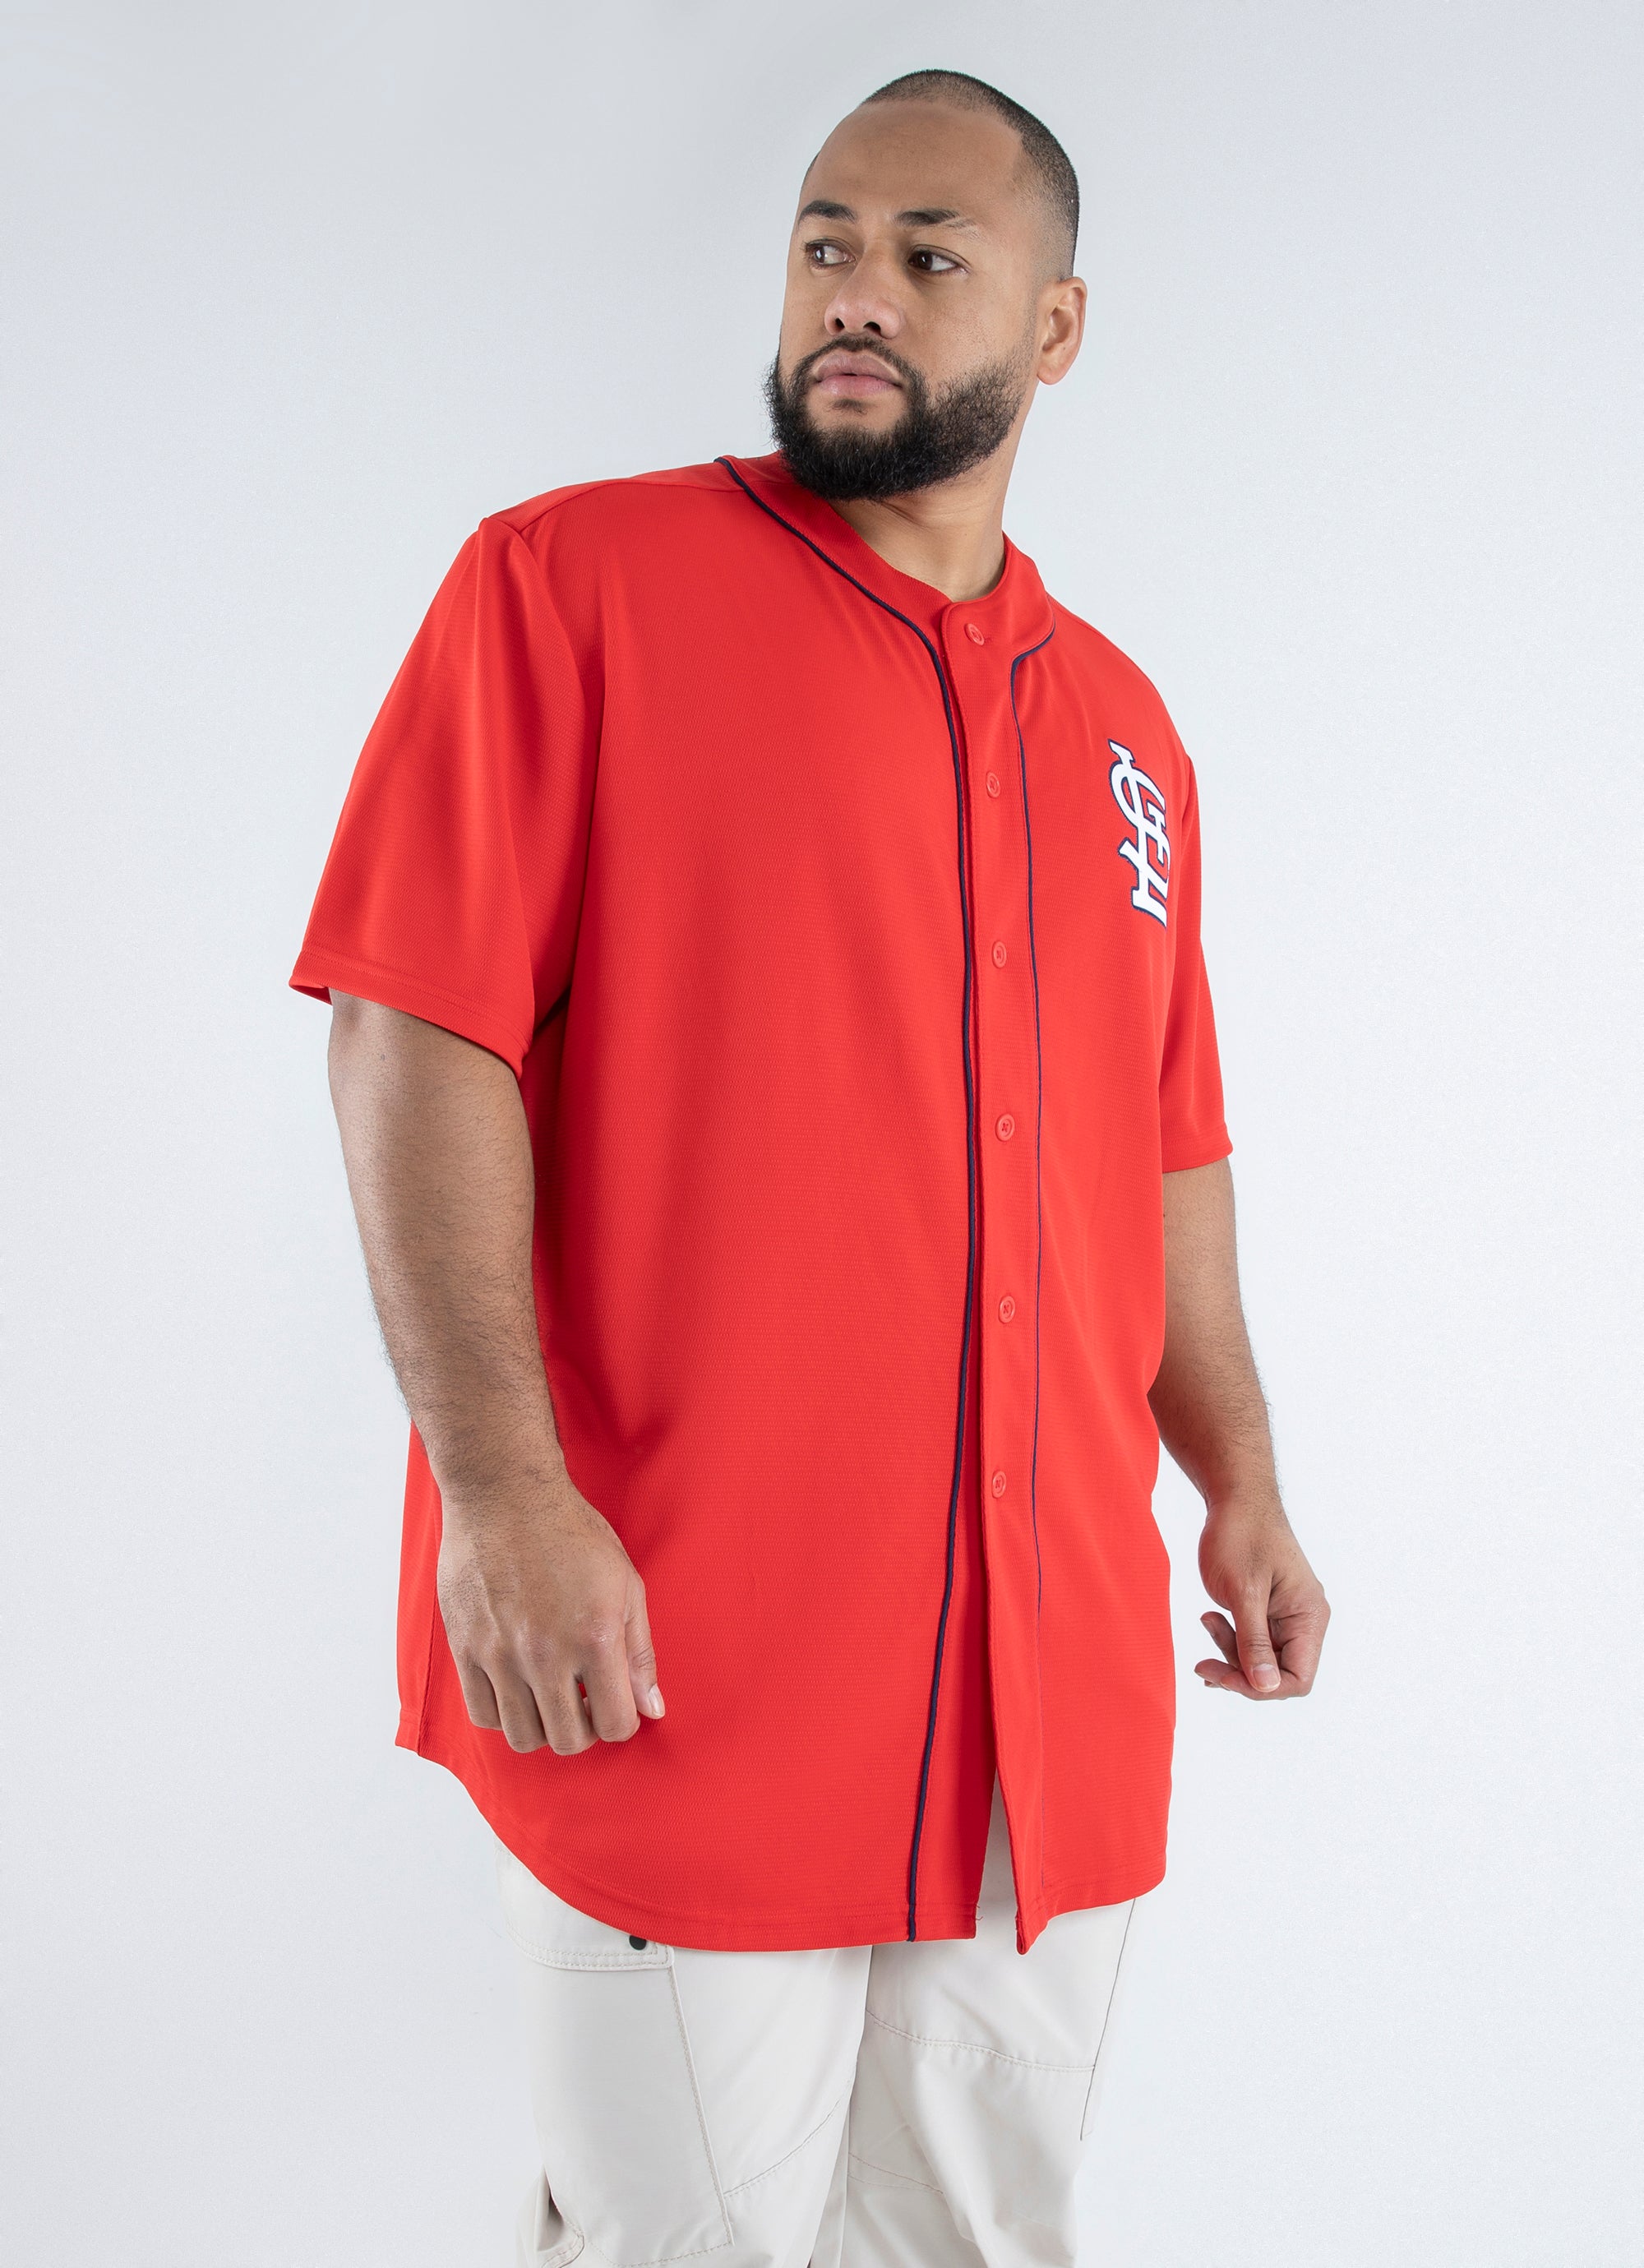 Majestic Mlb St Louis Cardinals Core Jersey - Big & Tall in Red